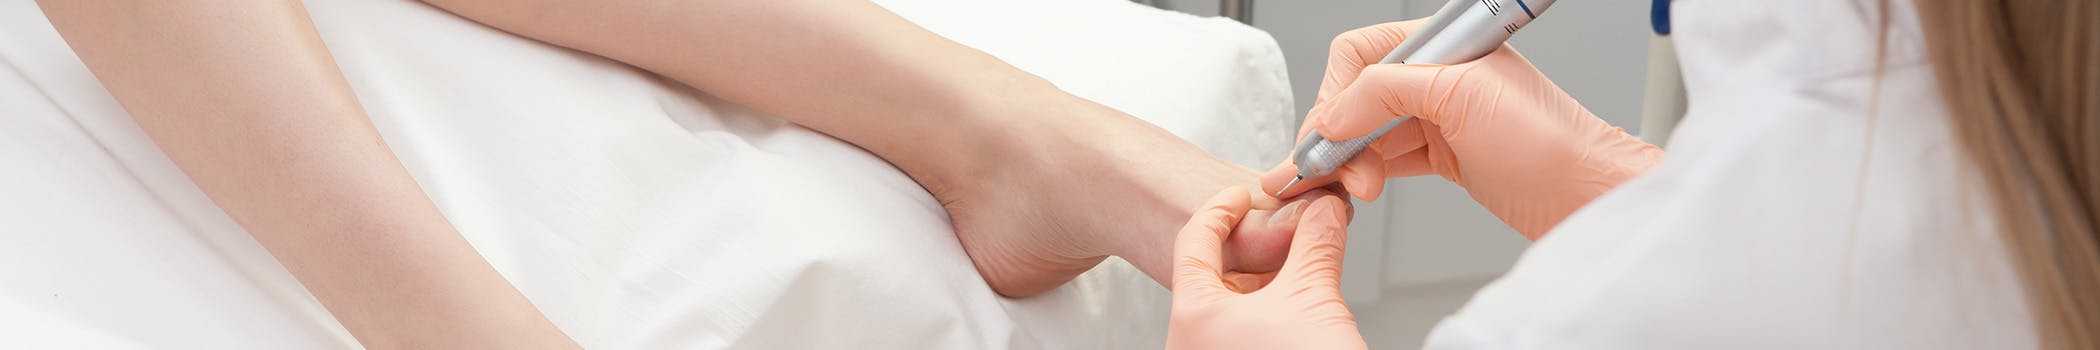 Top of Foot Stretch - Active Care Podiatry Capalaba - Active Care